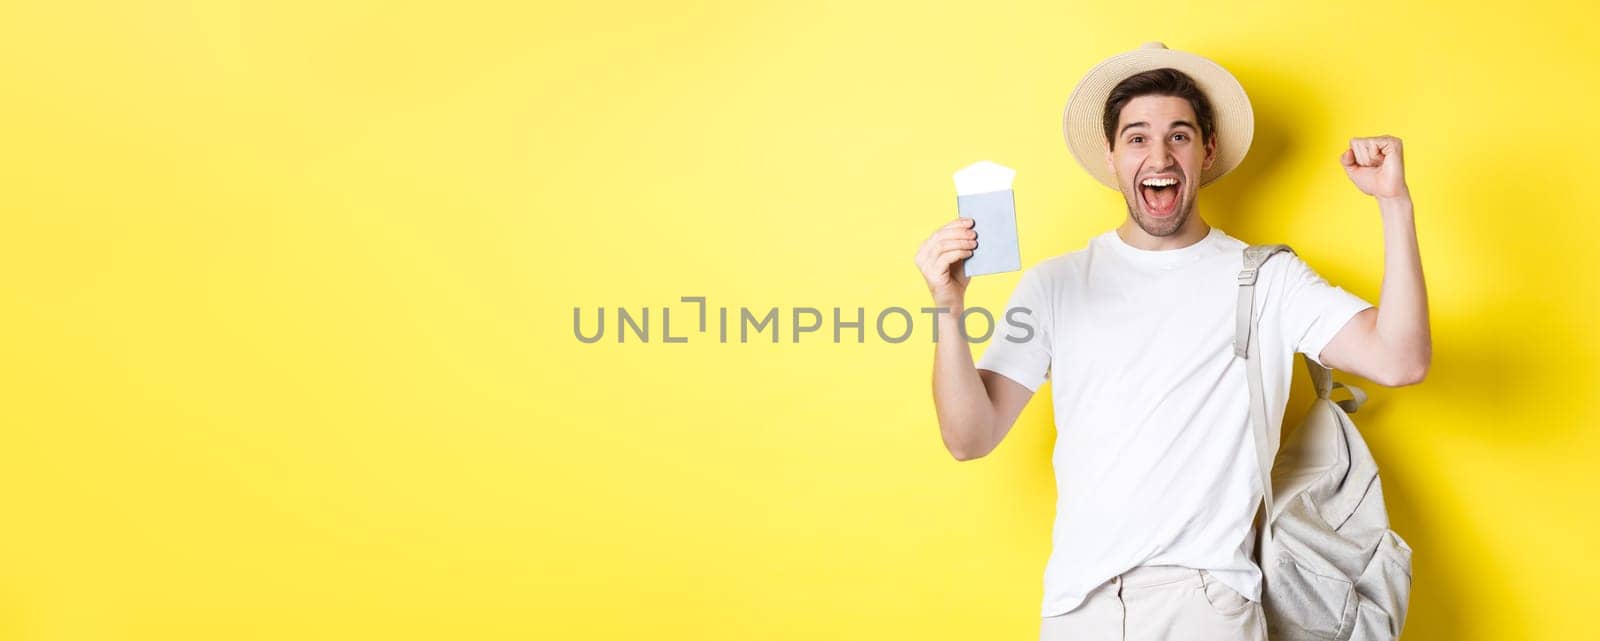 Tourism and vacation. Man feeling happy about summer trip, holding passport with plane tickets and backpack, raising hands up in celebration gesture, yellow background.